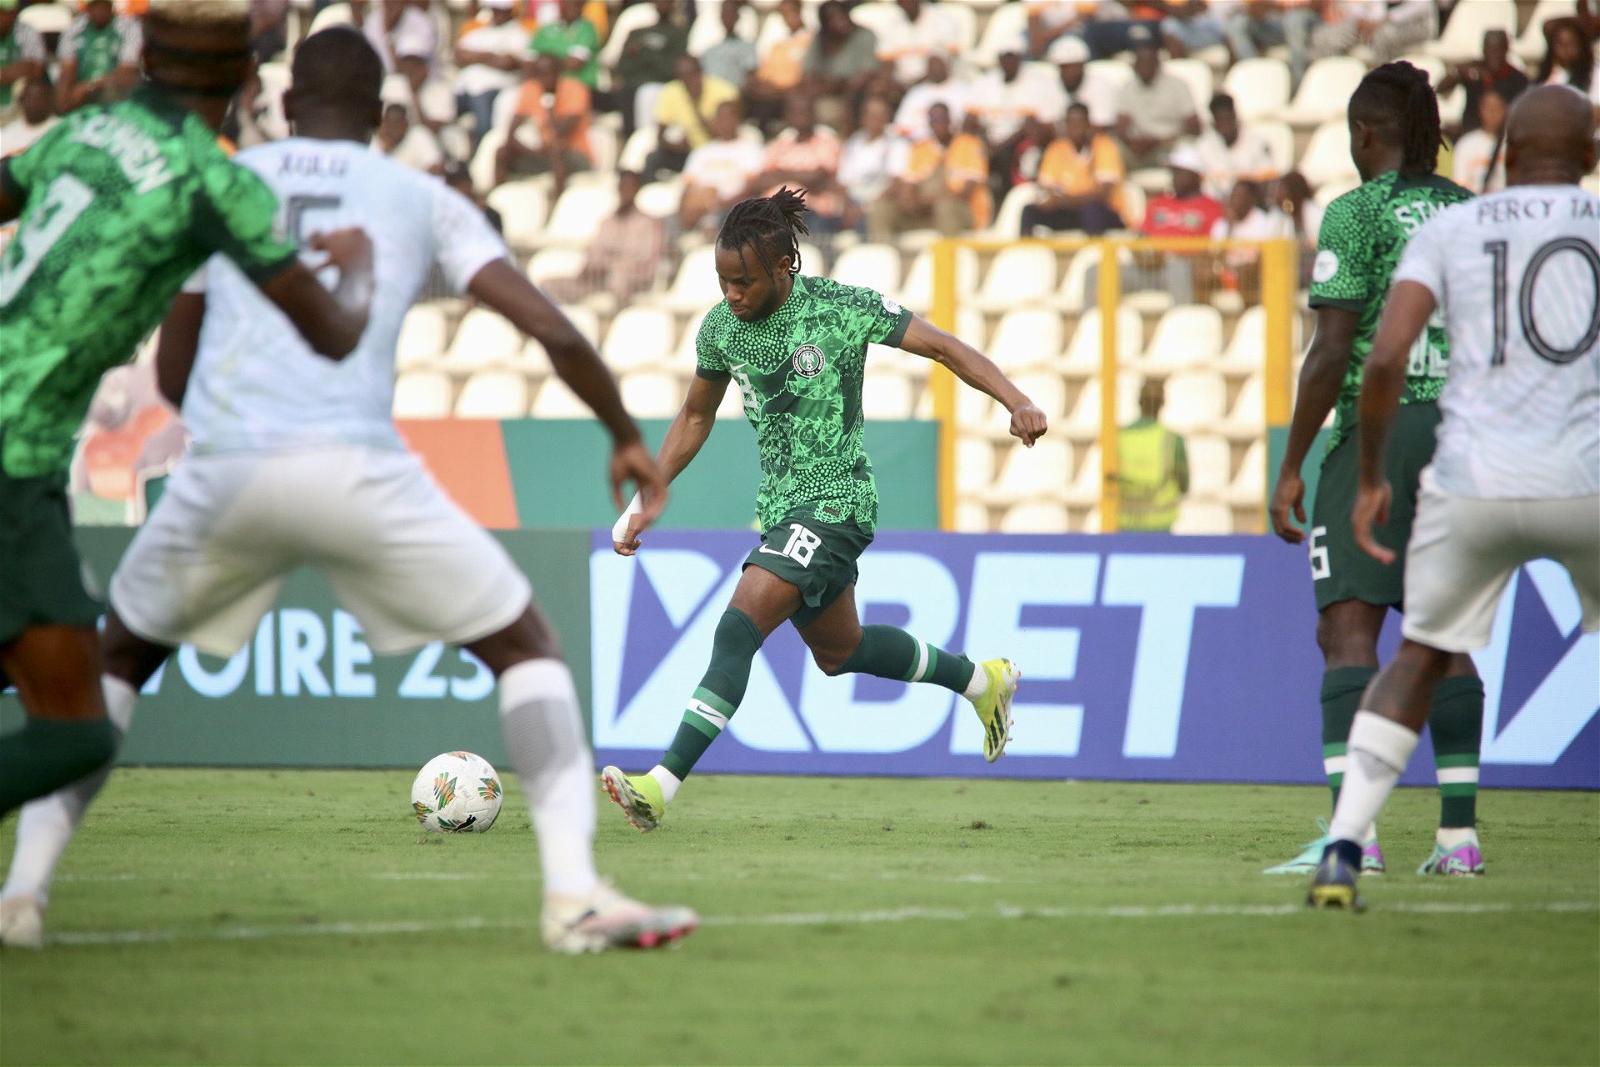 BREAKING: Super Eagles qualify for AFCON final after defeating South Africa on penalties